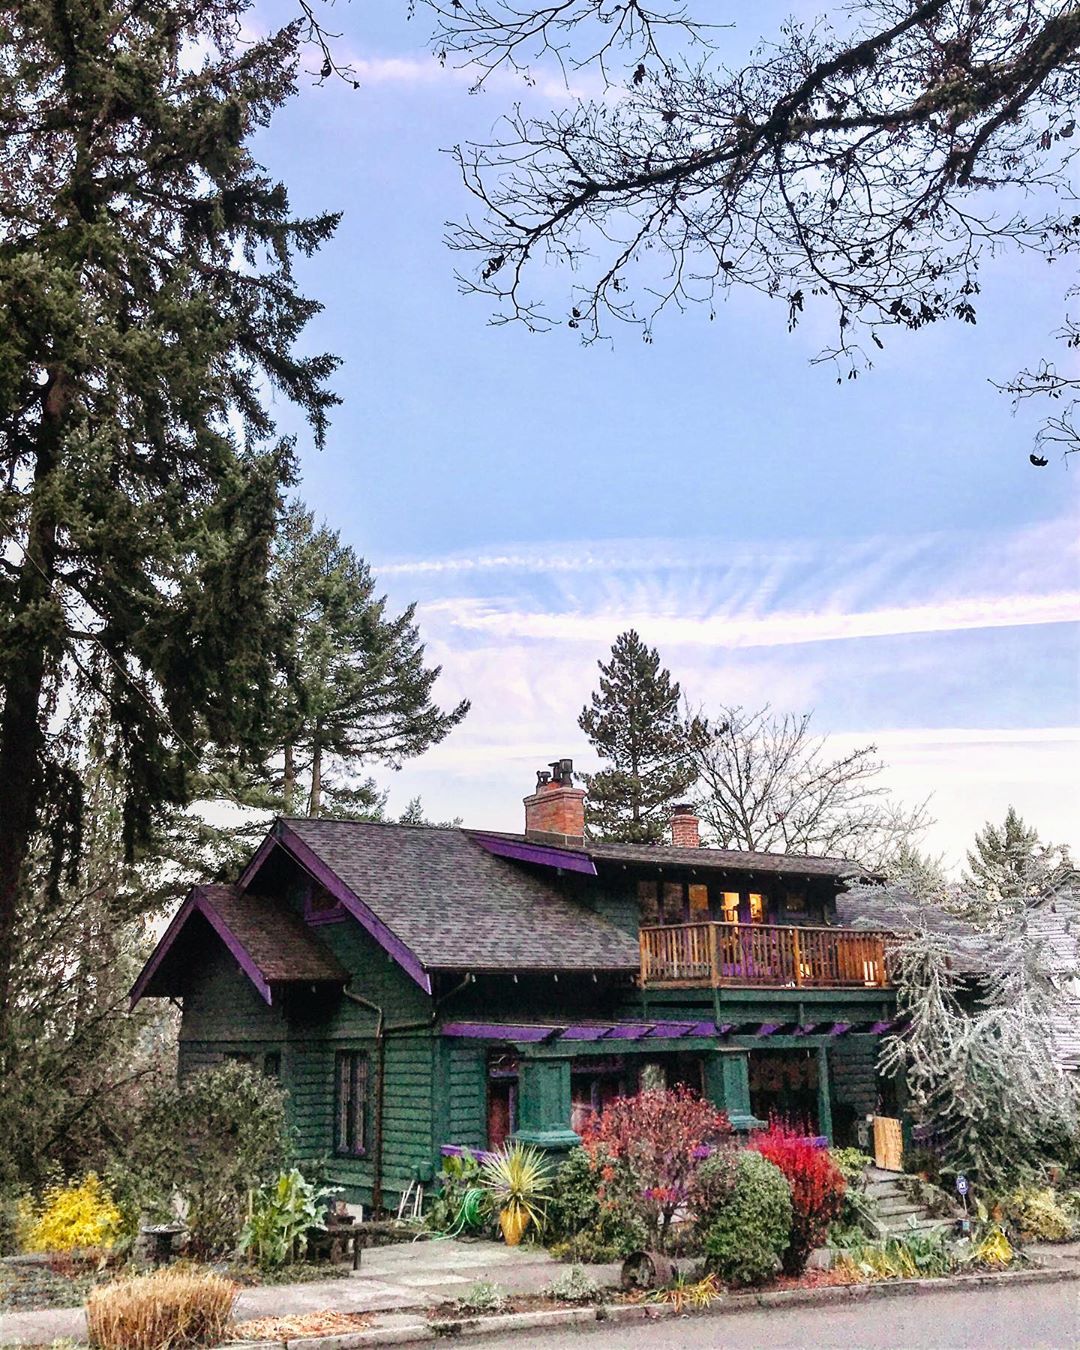 home in forest park, portland, OR with green and purple paint with nice landscaping photo by Instagram user @elvinem11